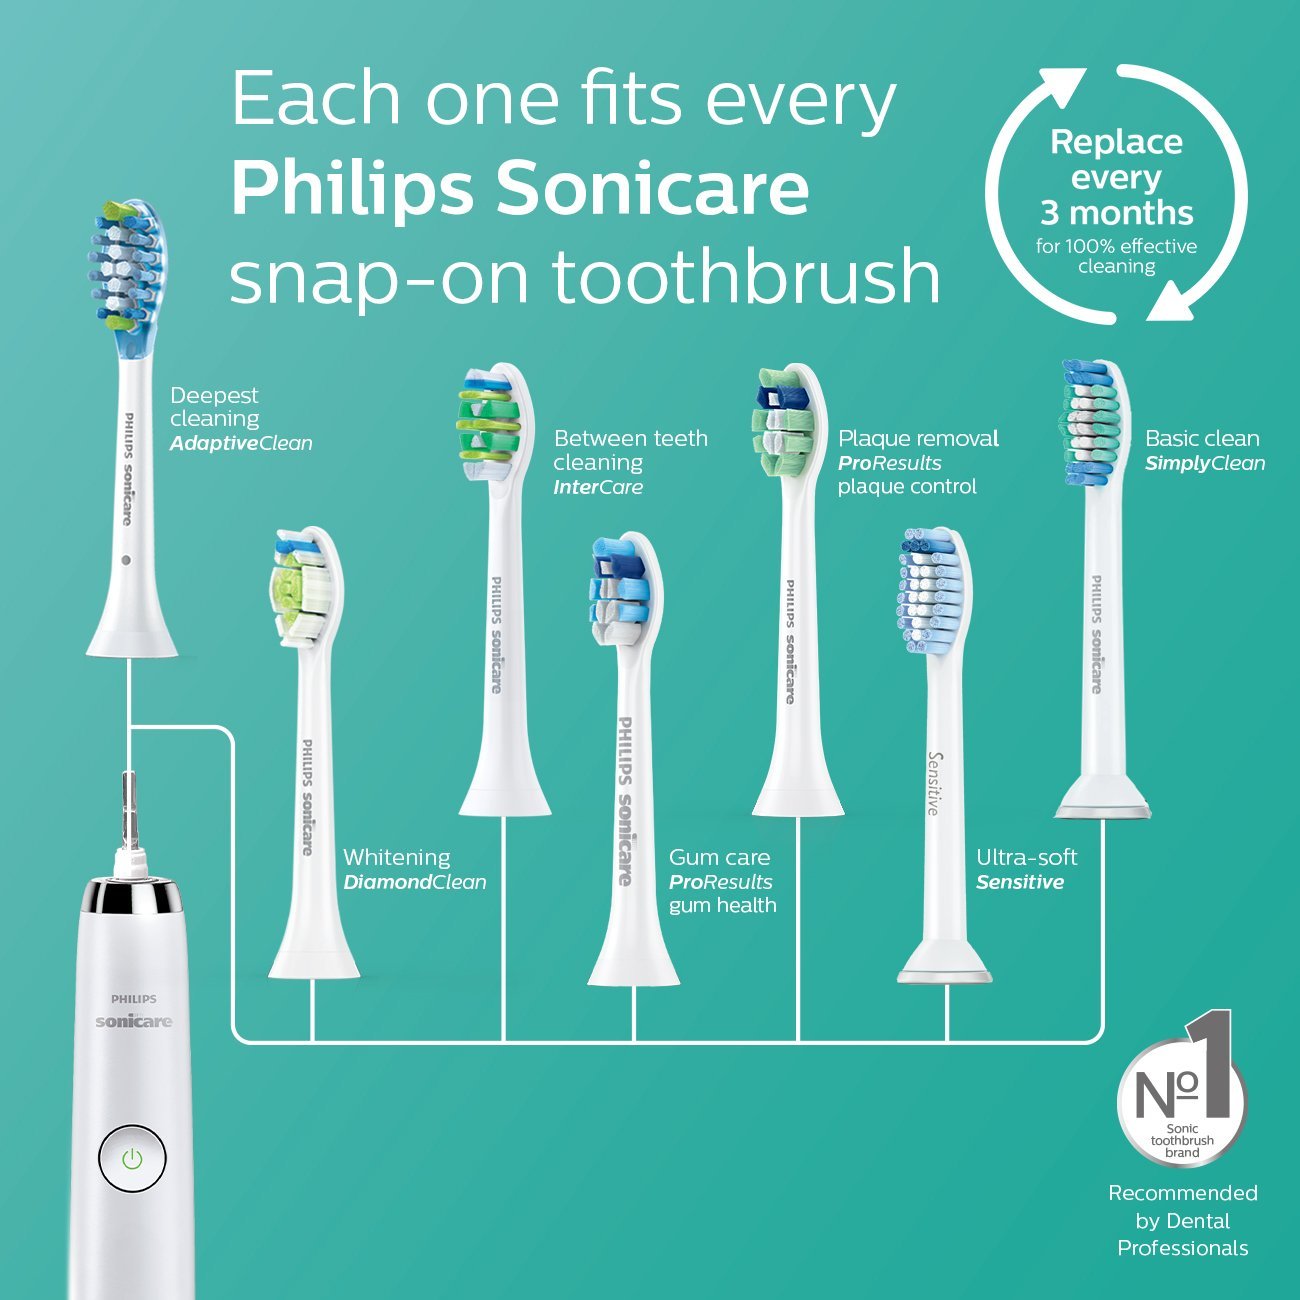 Philips Sonicare HX8911/02 HealthyWhite+ Rechargeable Electric Toothbrush, White